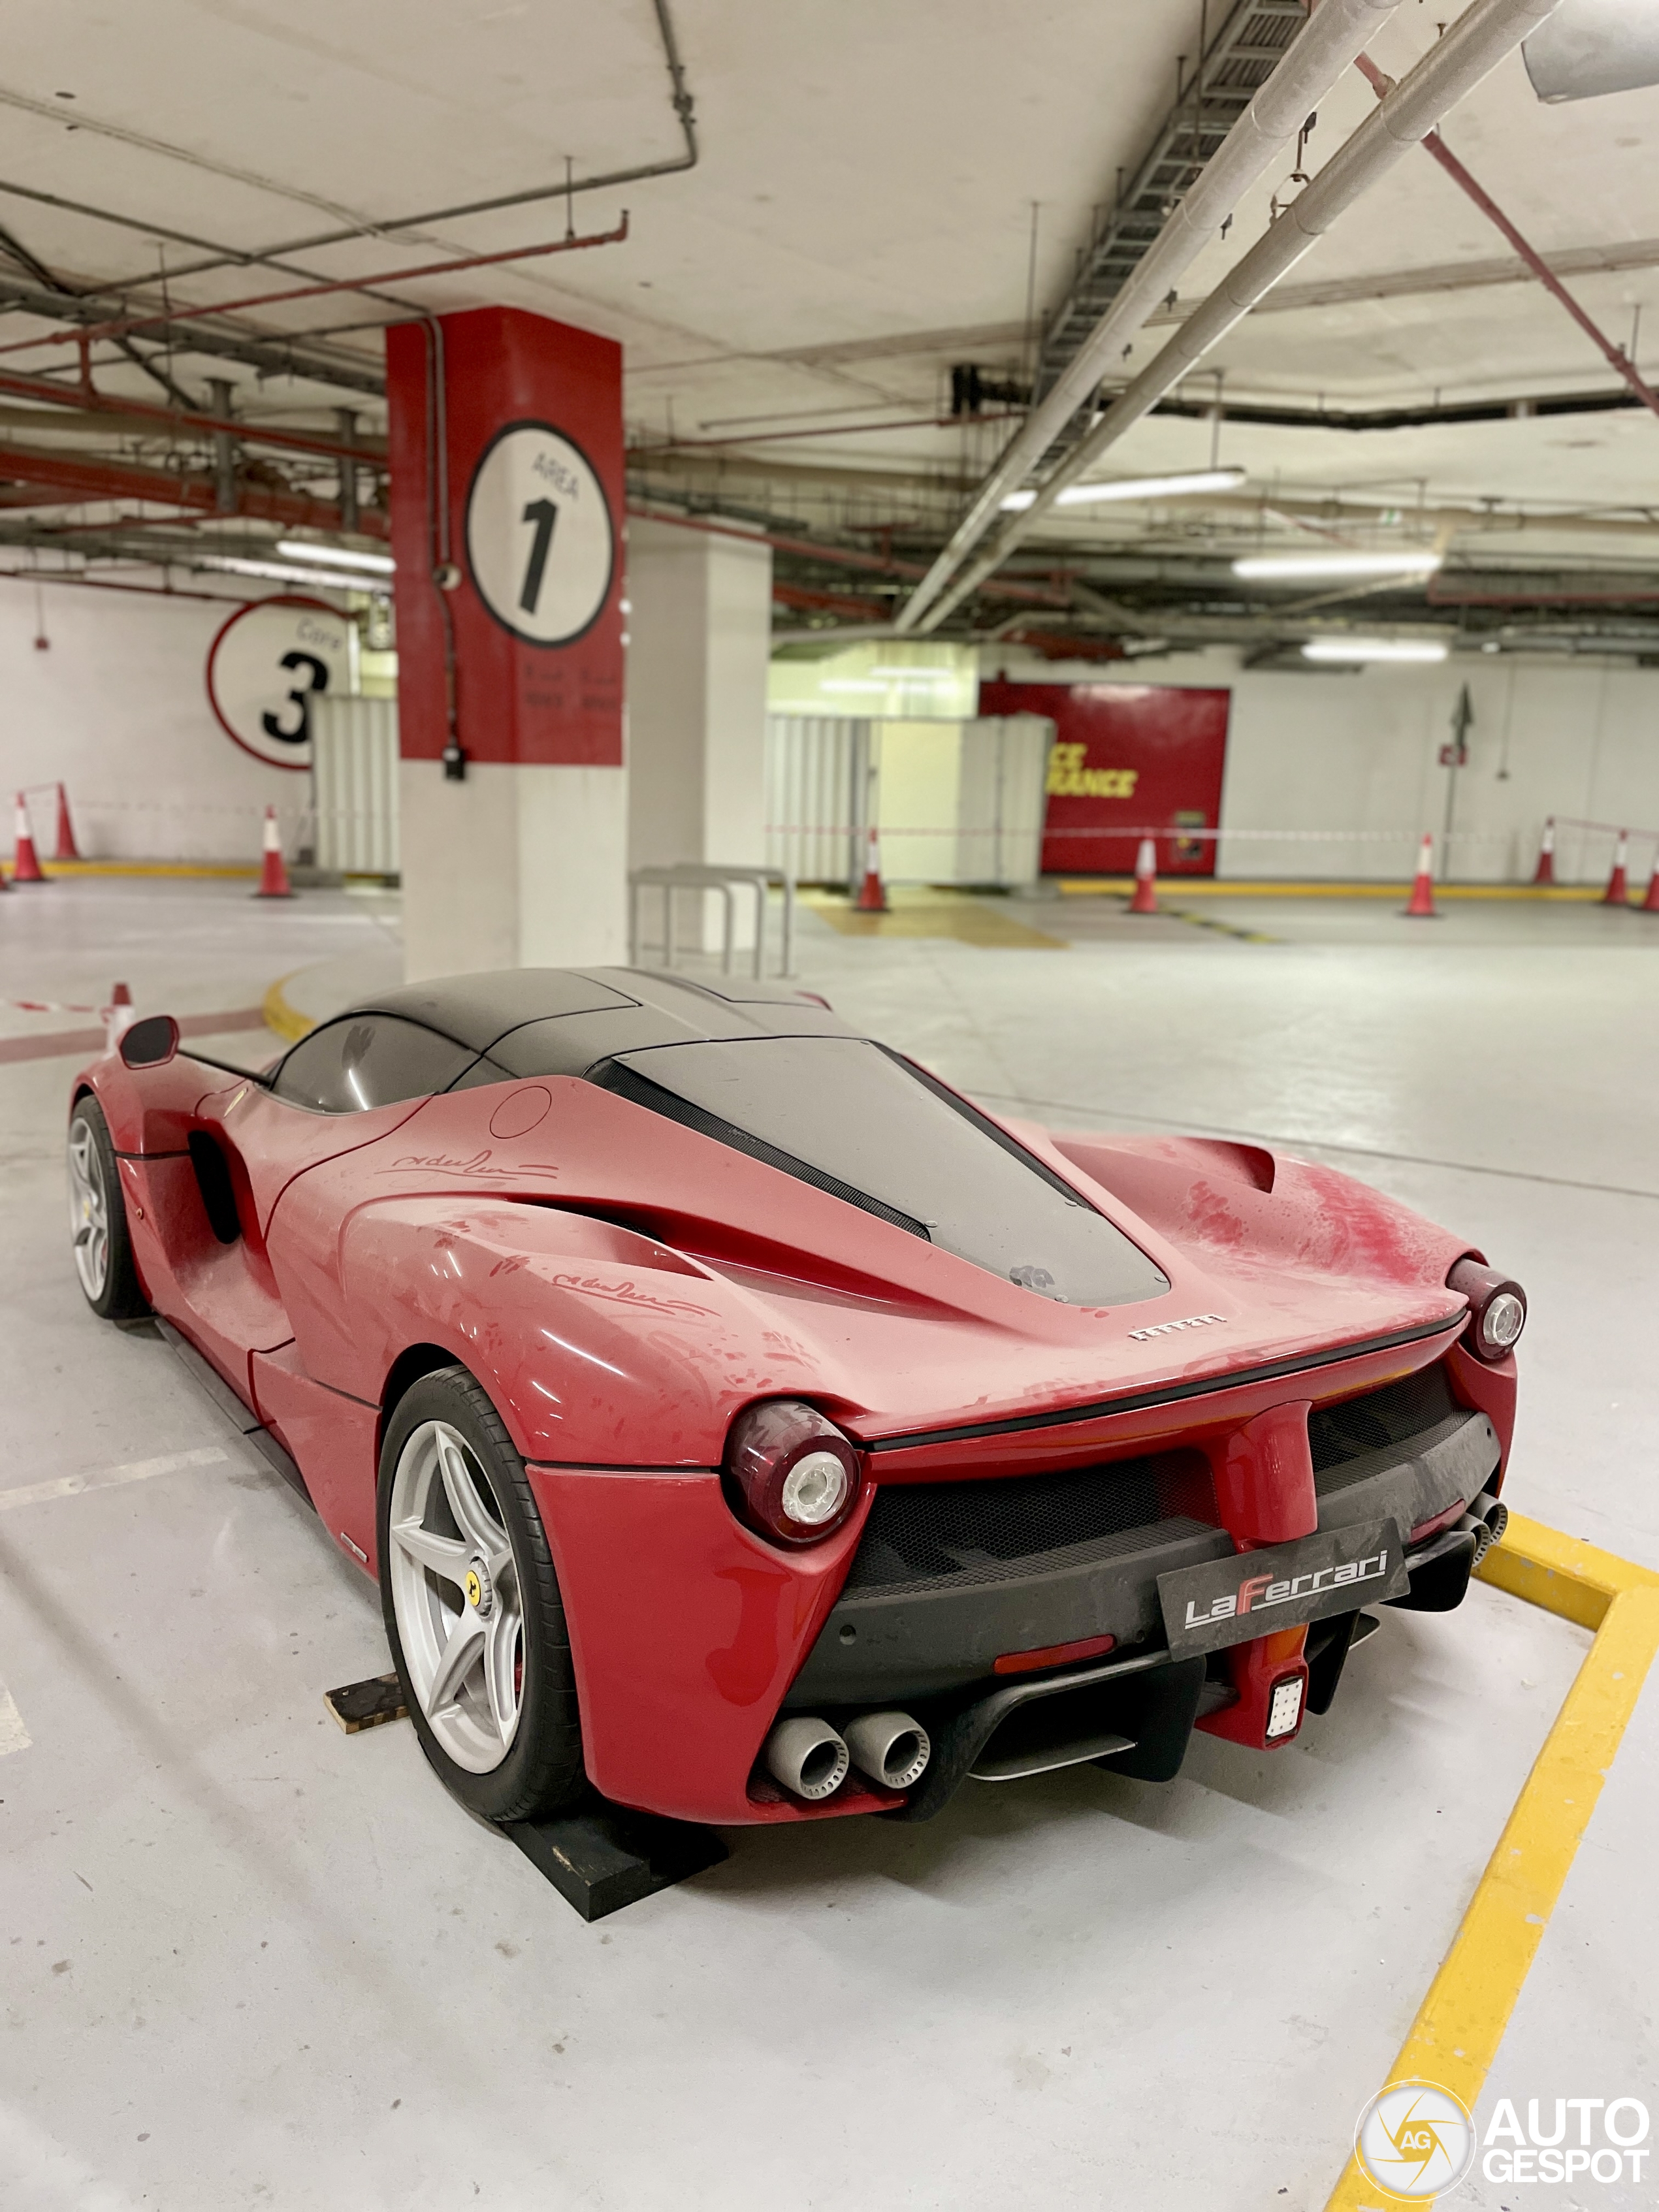 Do we see a neglected Laferrari here?